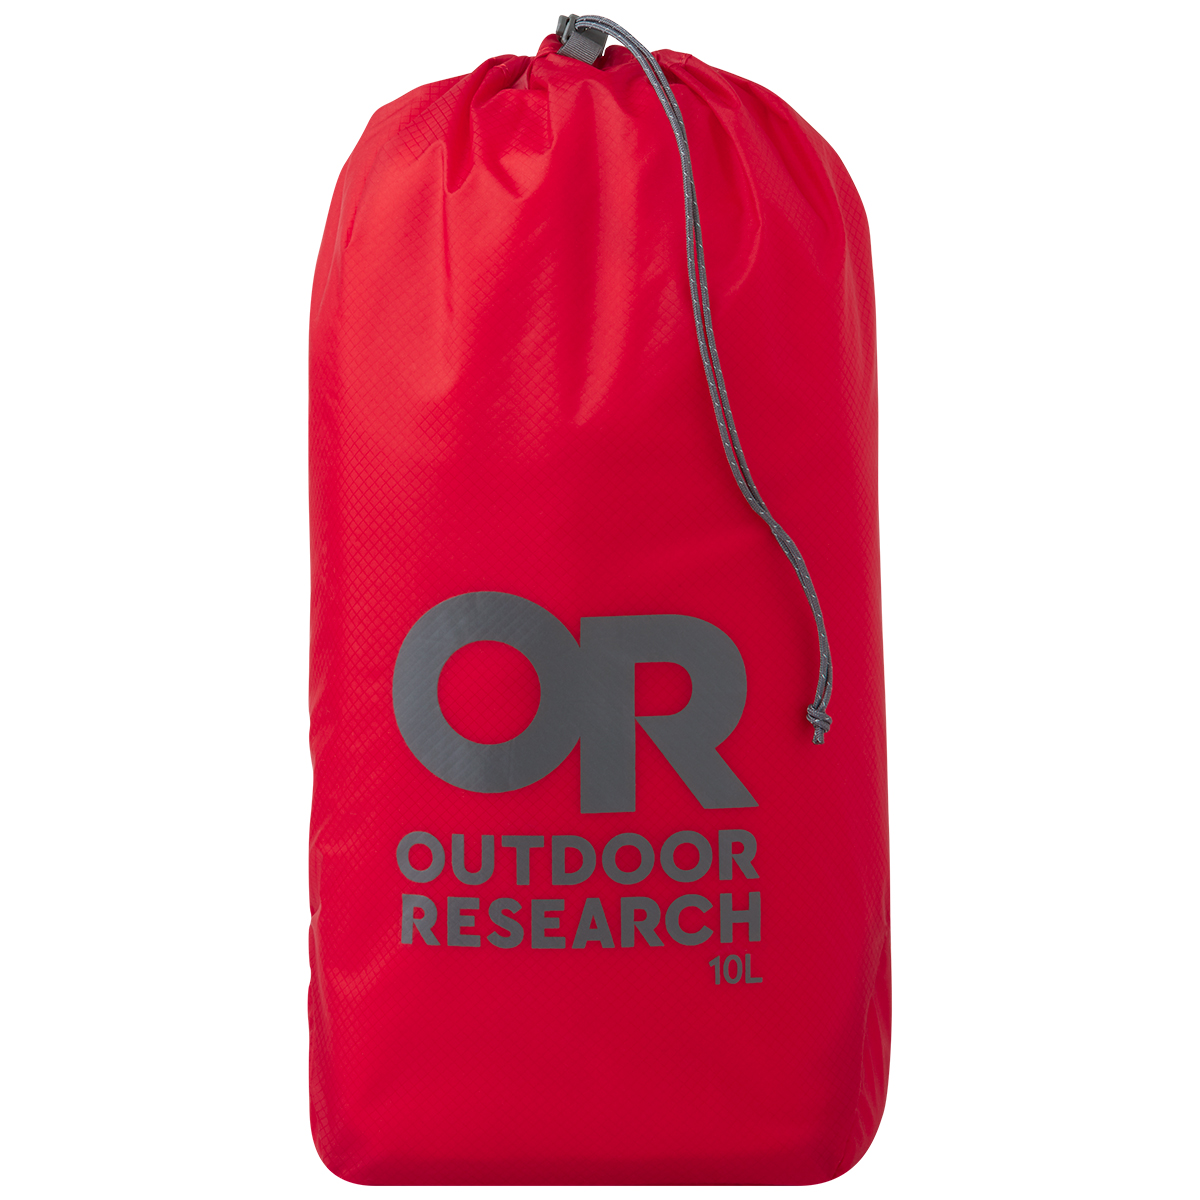 Outdoor Research Packout Ultralight Stuff Sack 10L